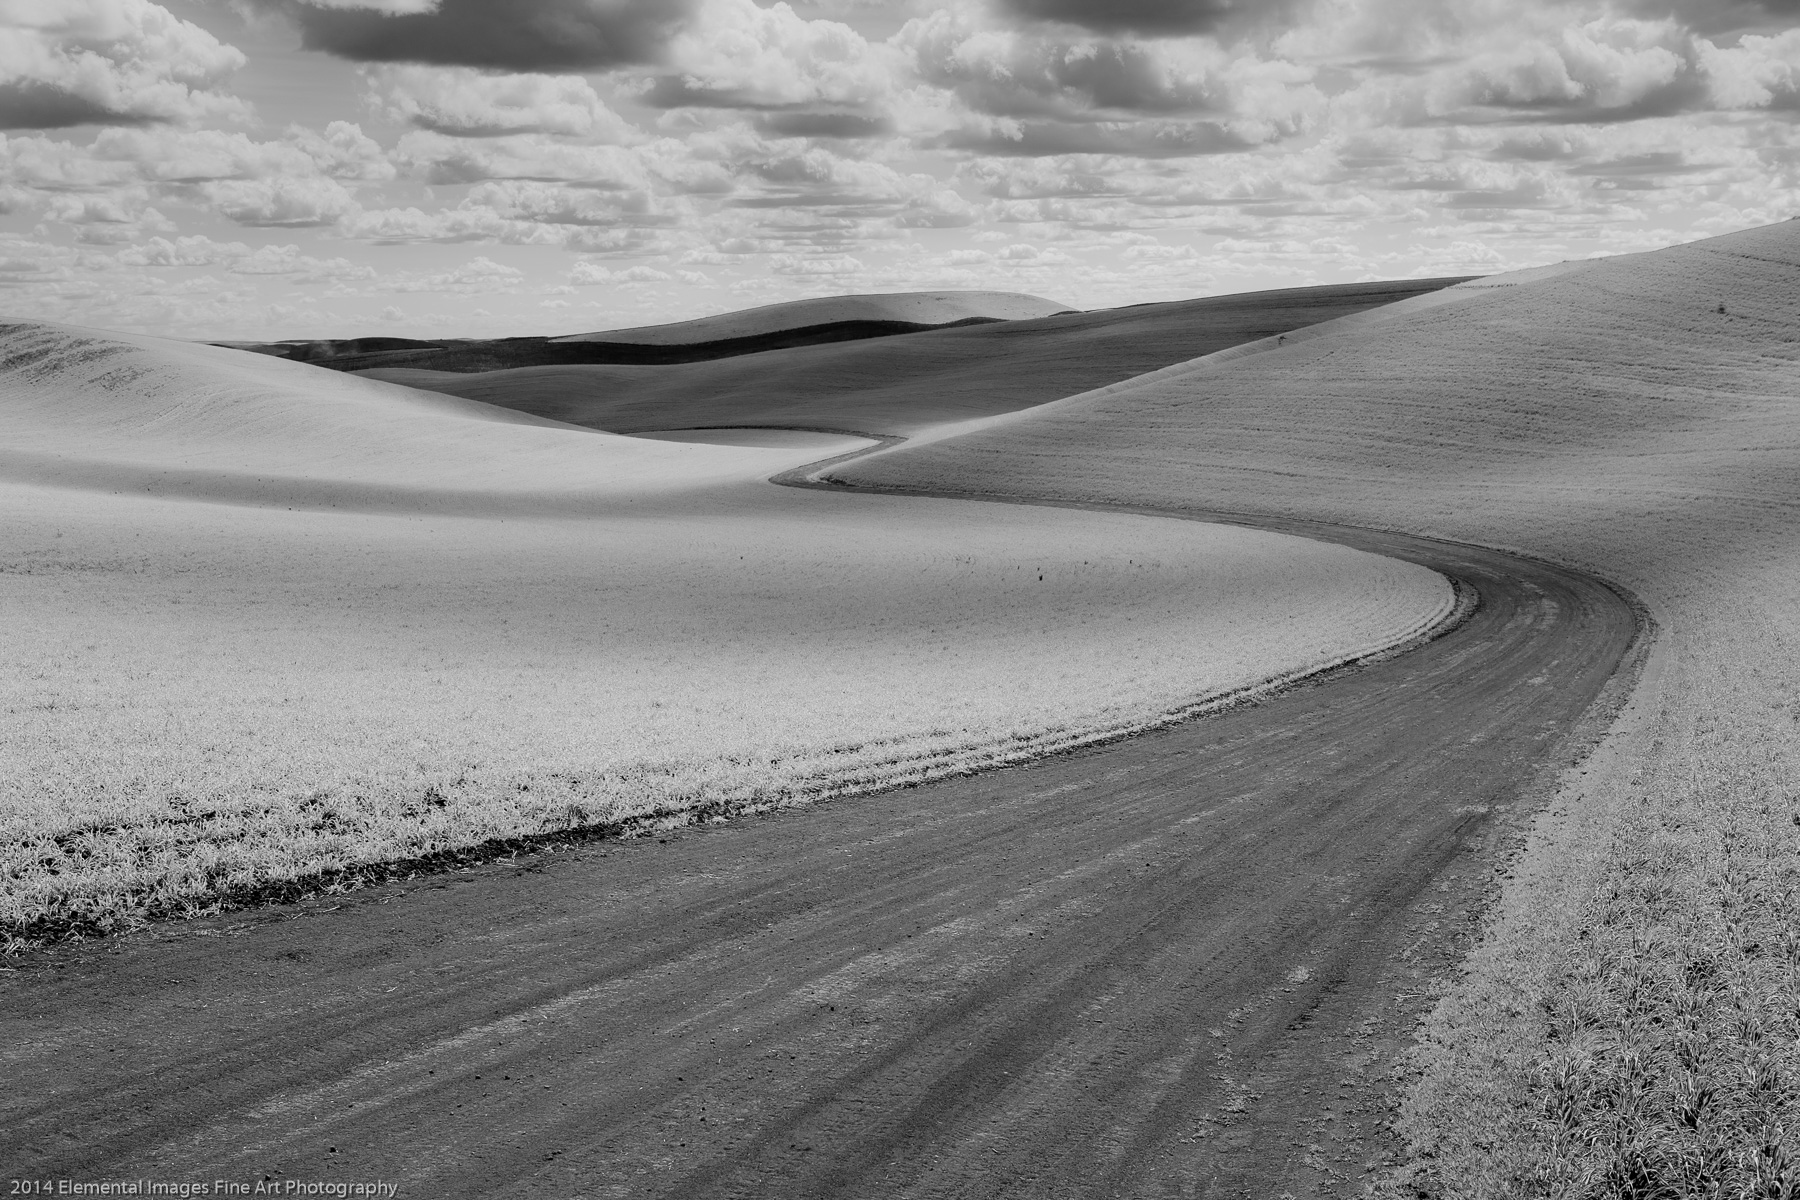 A Winding Road | The Palouse | WA | USA - © 2014 Elemental Images Fine Art Photography - All Rights Reserved Worldwide